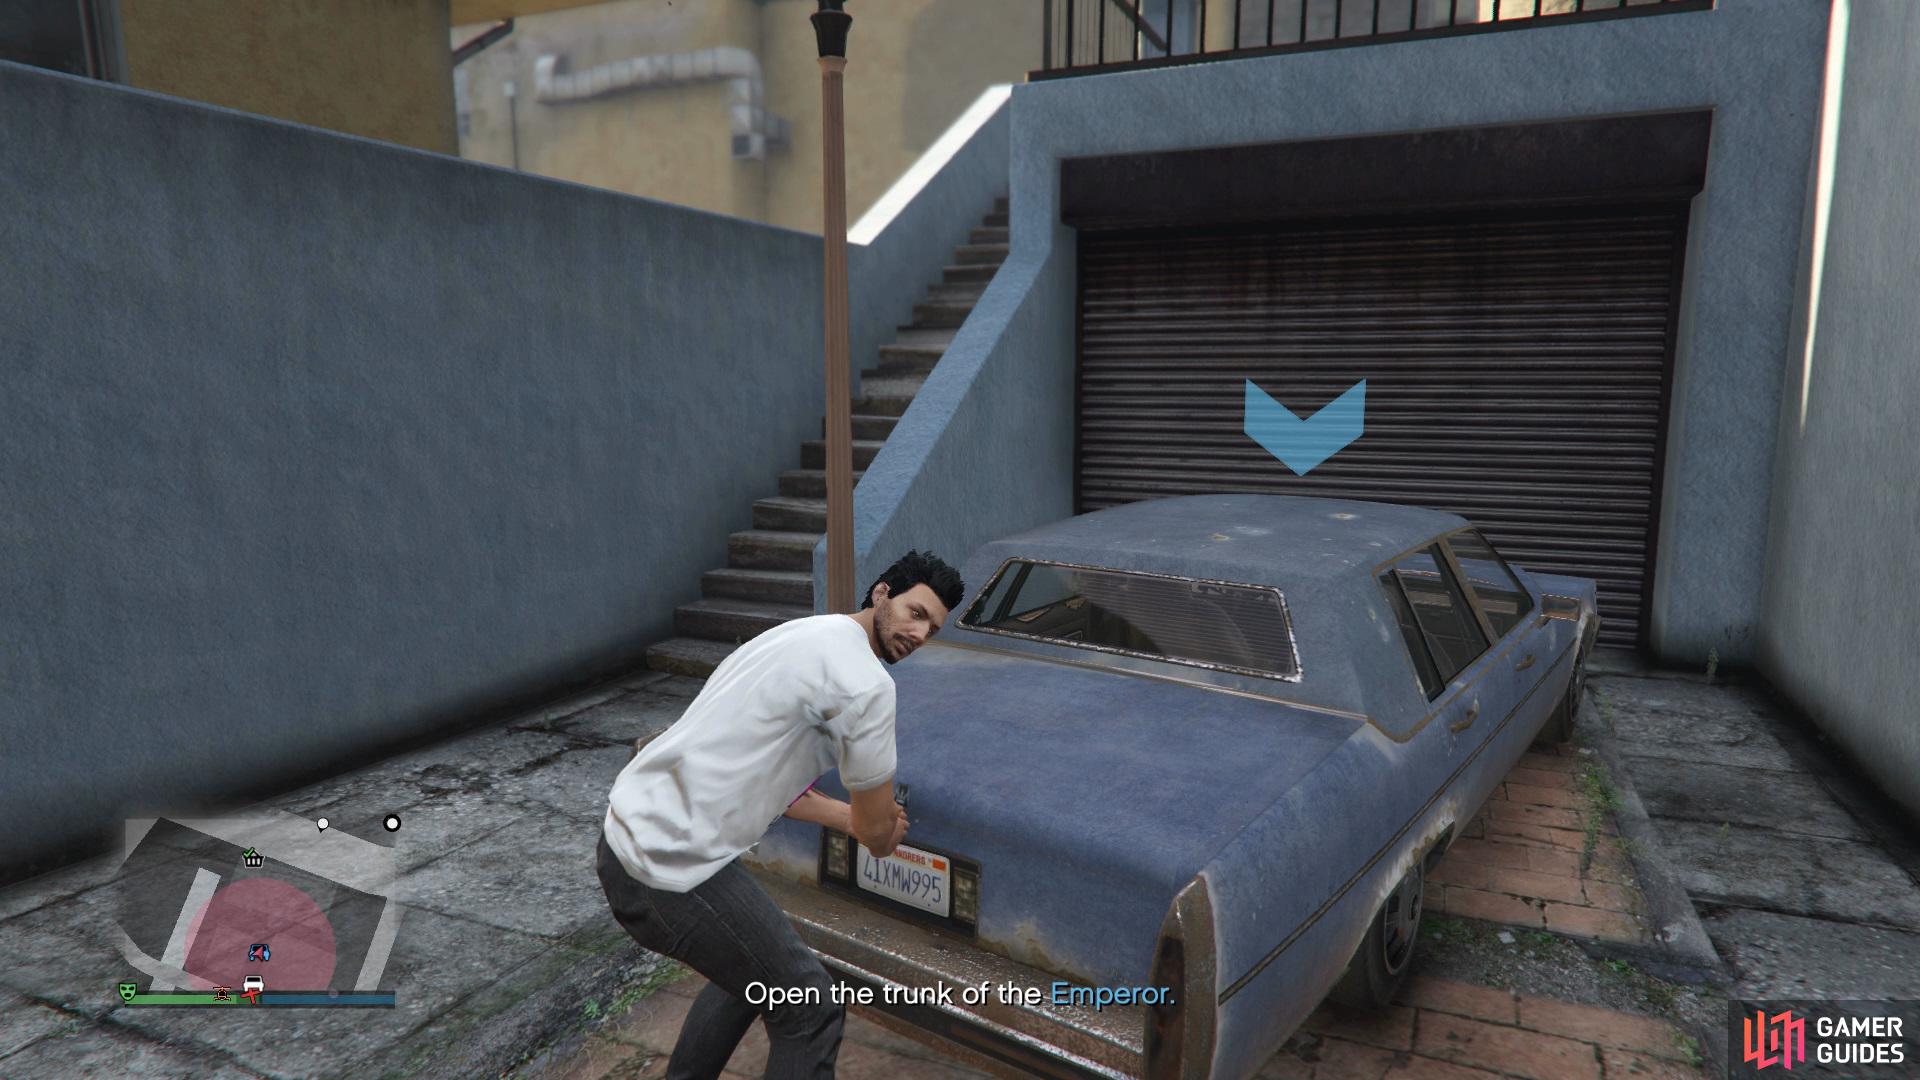 Head to Vespucci Canals and collect the Signal Jammers from the trunk of the Emperor